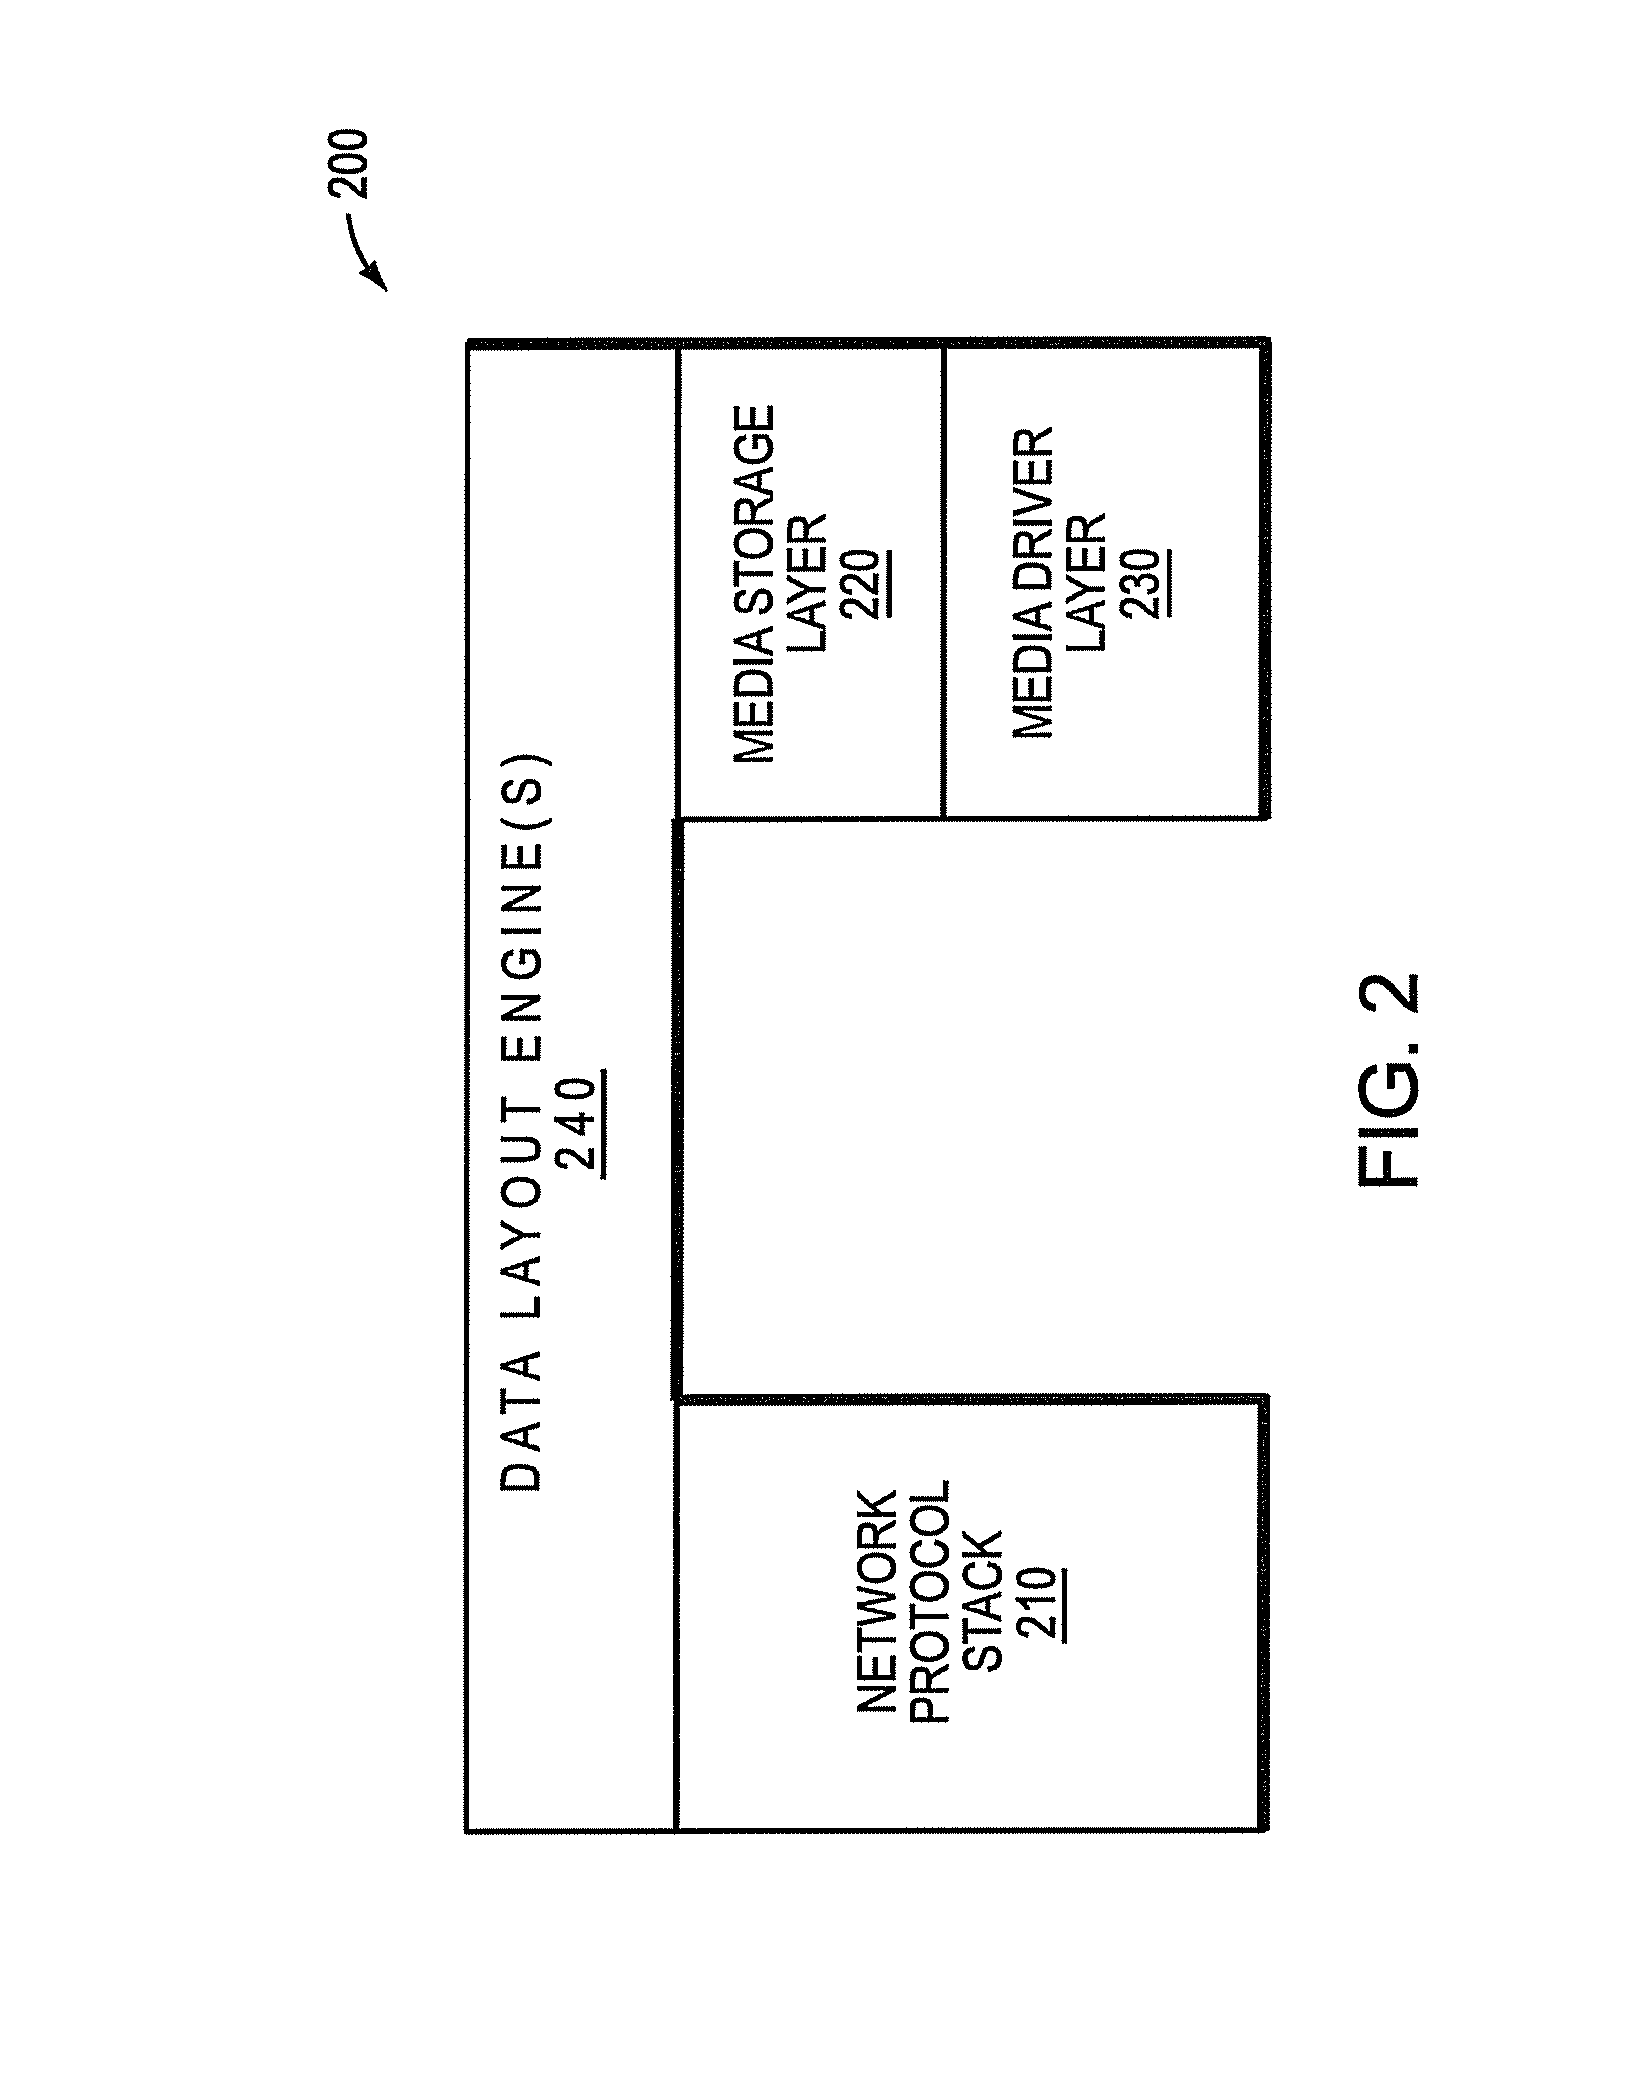 Cache-based storage system architecture